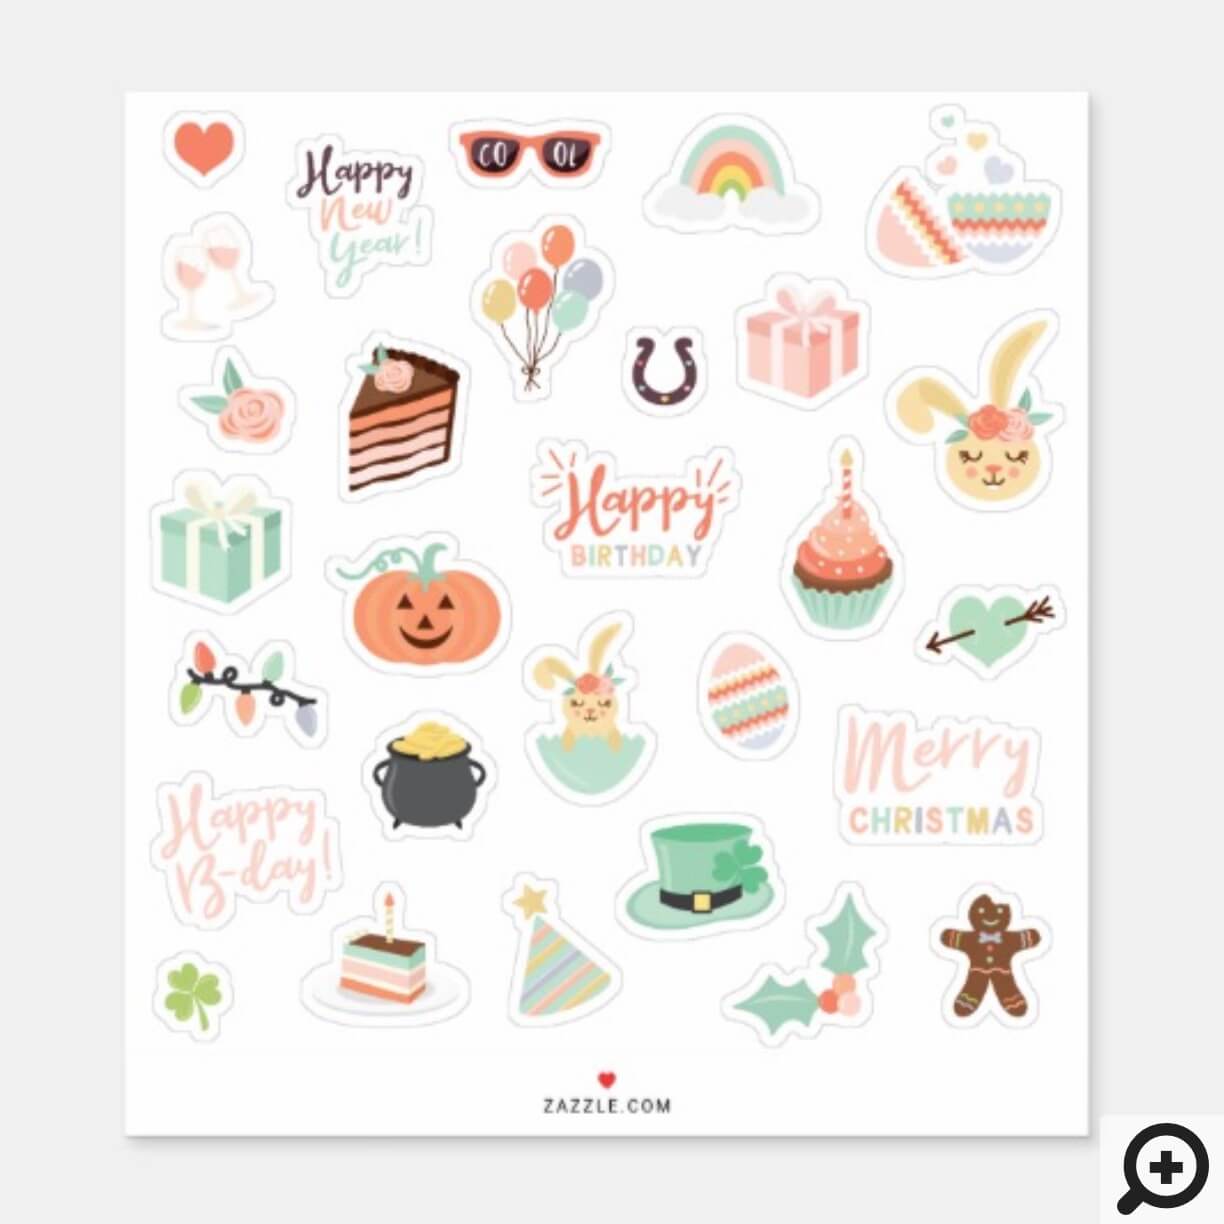 Special Occasions Holiday Celebration Sticker Set